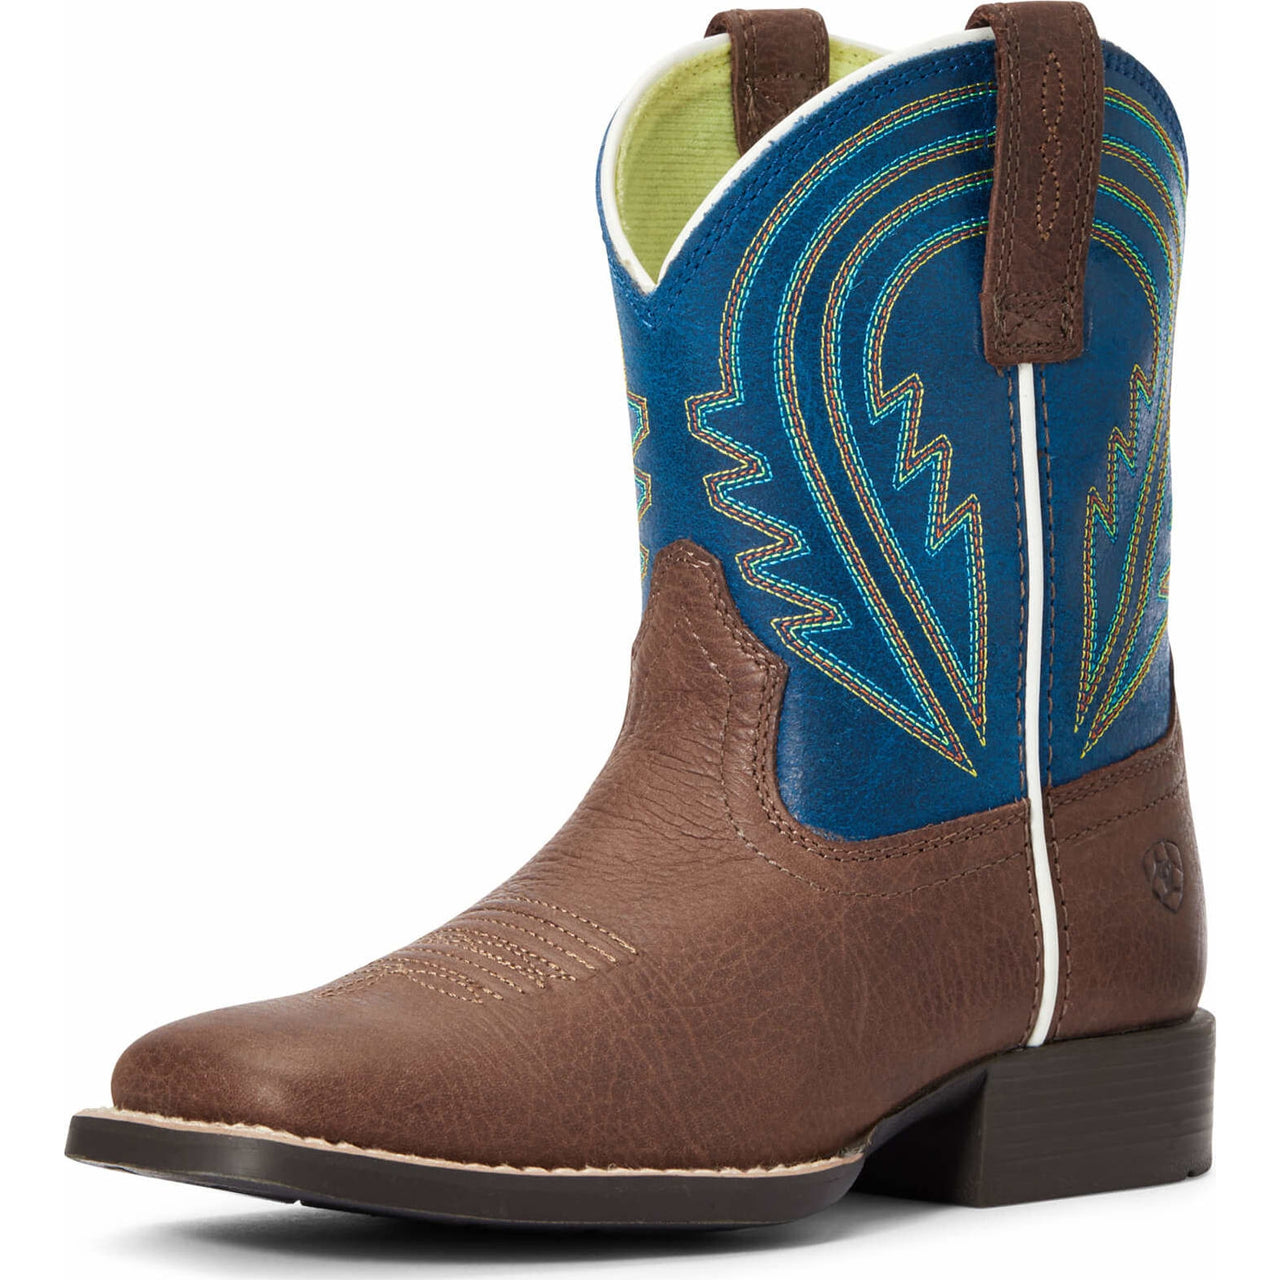 Ariat Youth Lil Hoss Western Boots - Chocolate/Navy